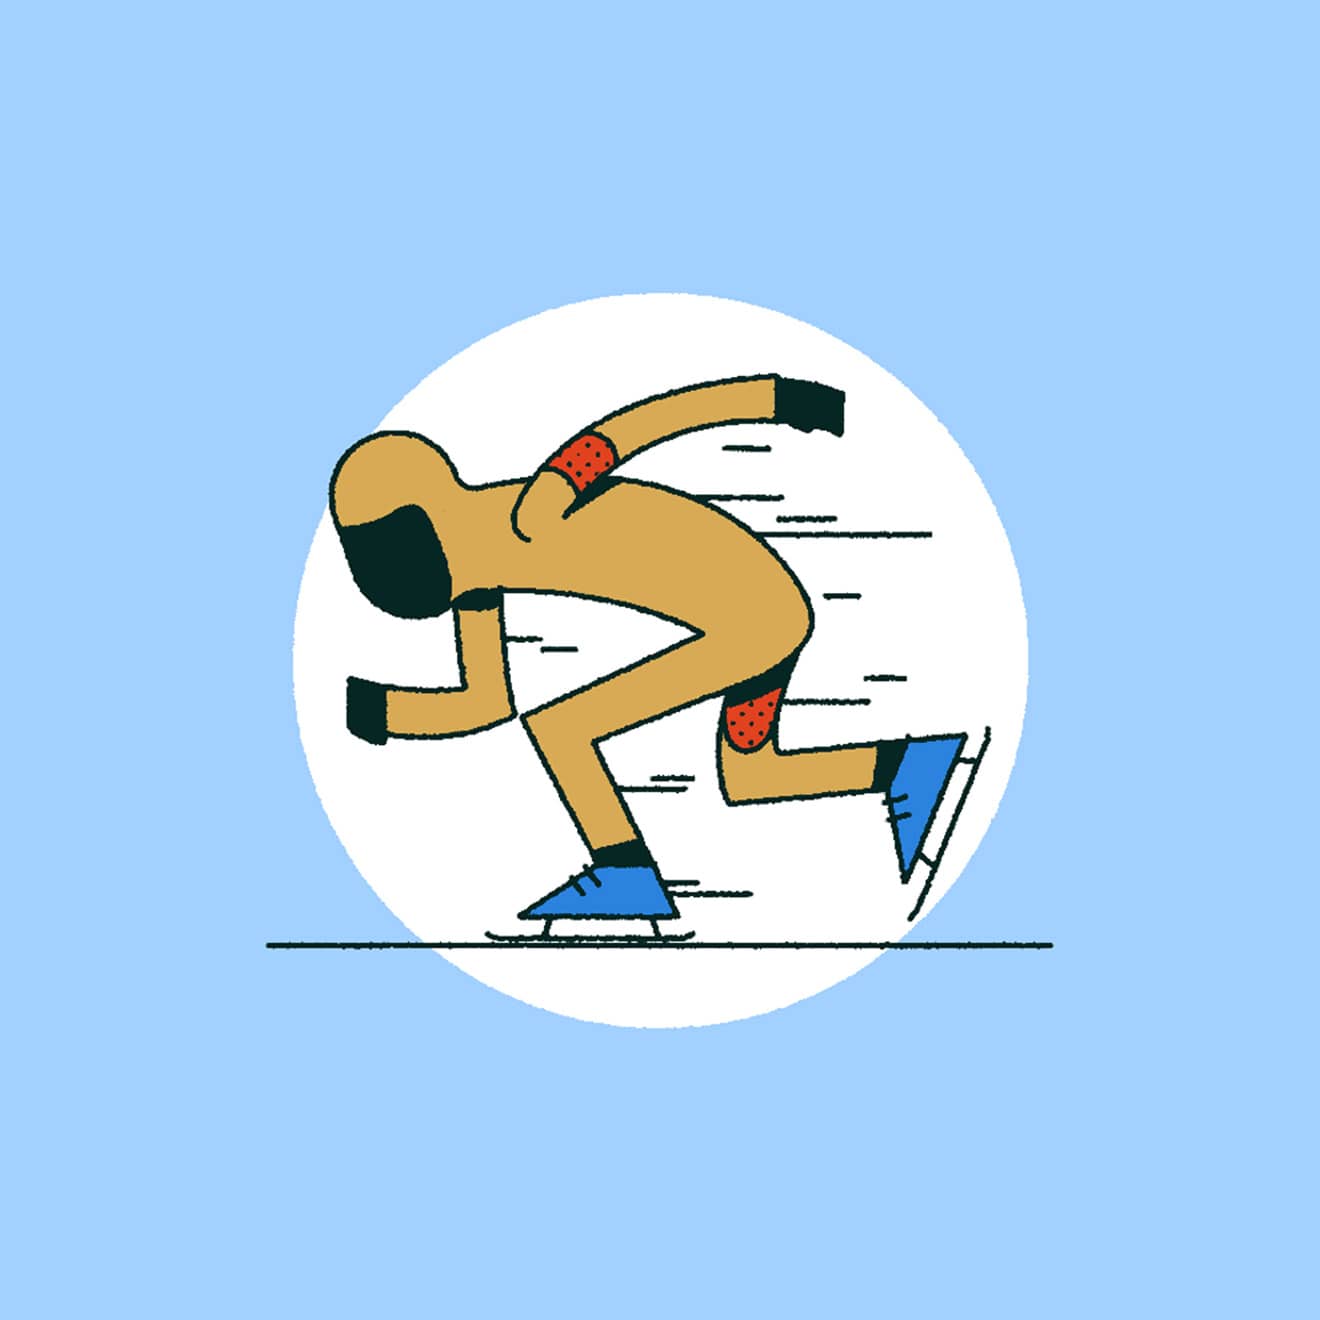 Blue, Red, White & Beige illustration of a person speed skating